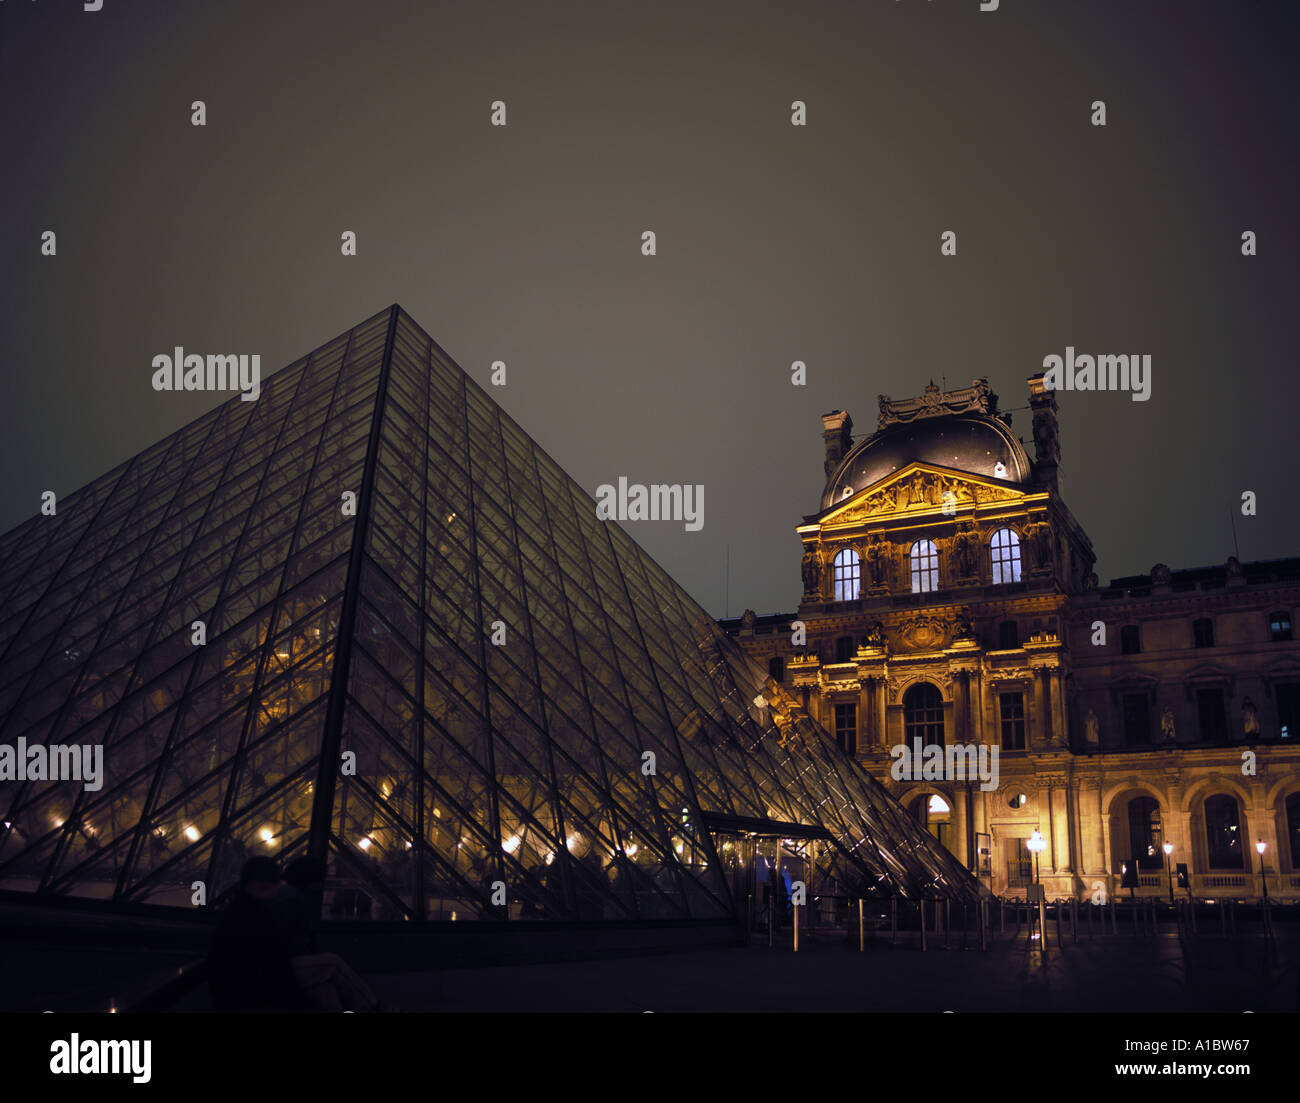 The Glass Pyramid at the Louvre Art Museum in Paris France Stock Photo